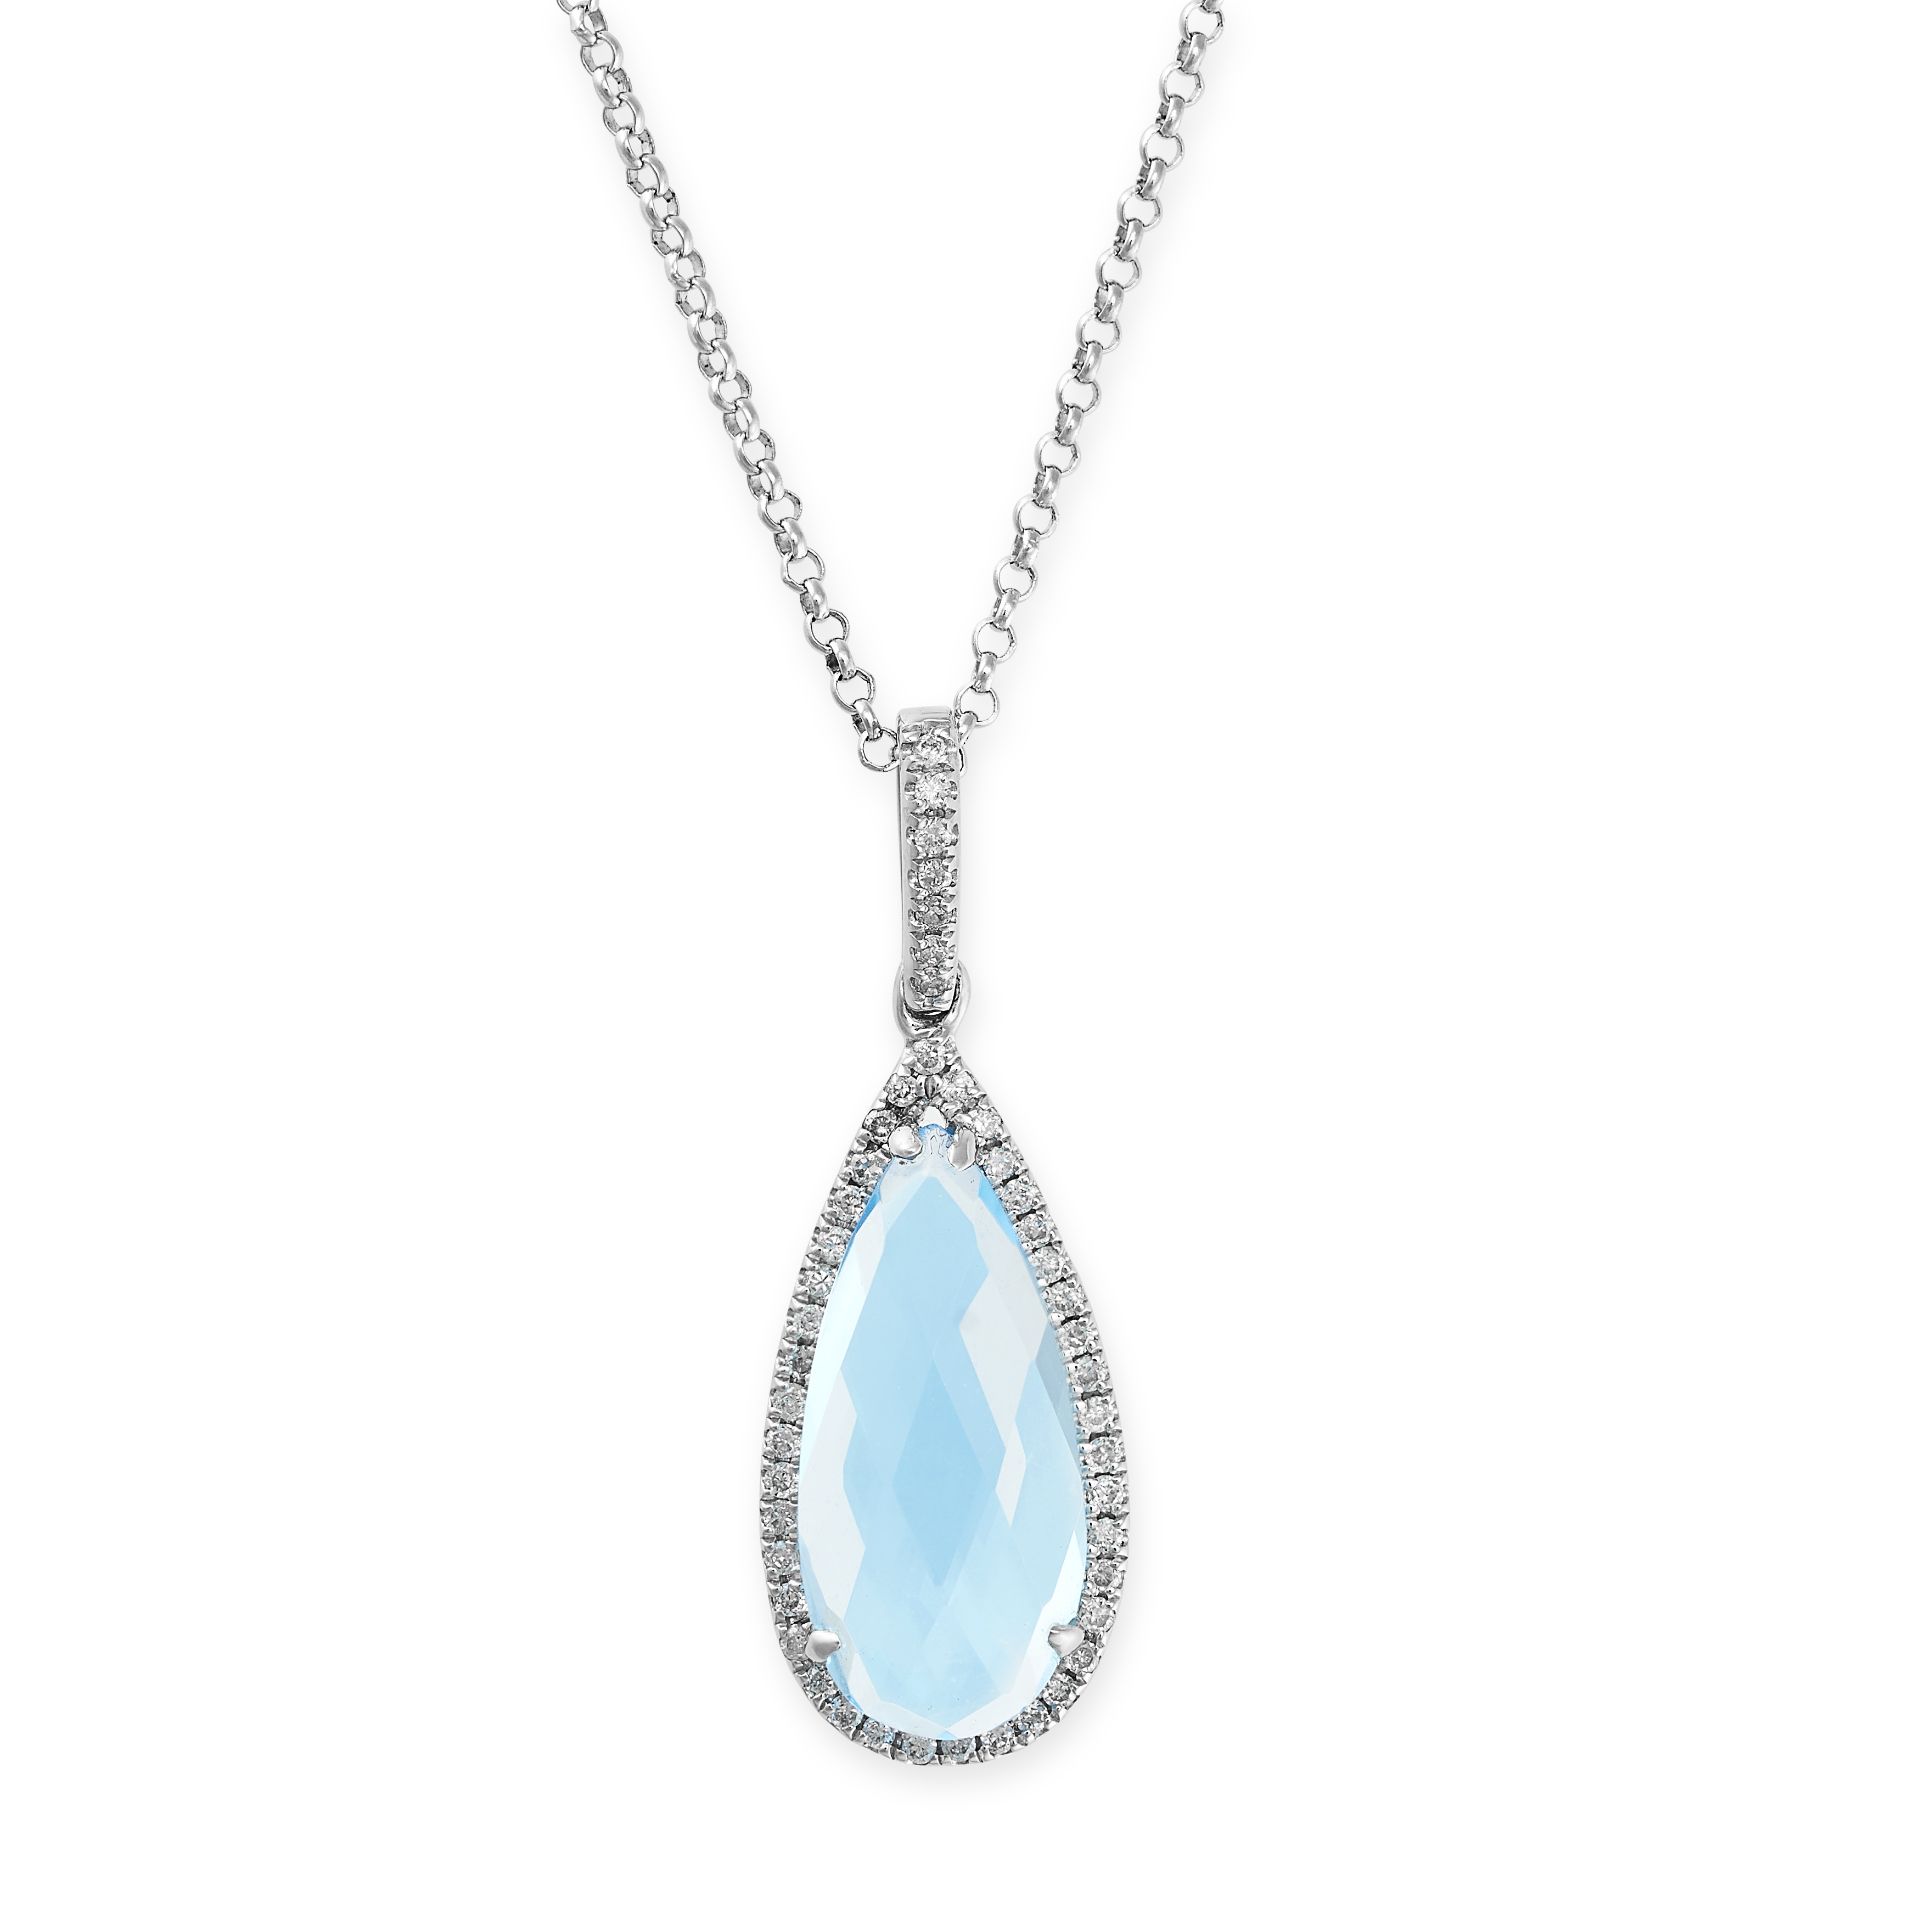 A BLUE TOPAZ AND DIAMOND PENDANT NECKLACE in 18ct white gold, the pendant set with a pear shaped ...